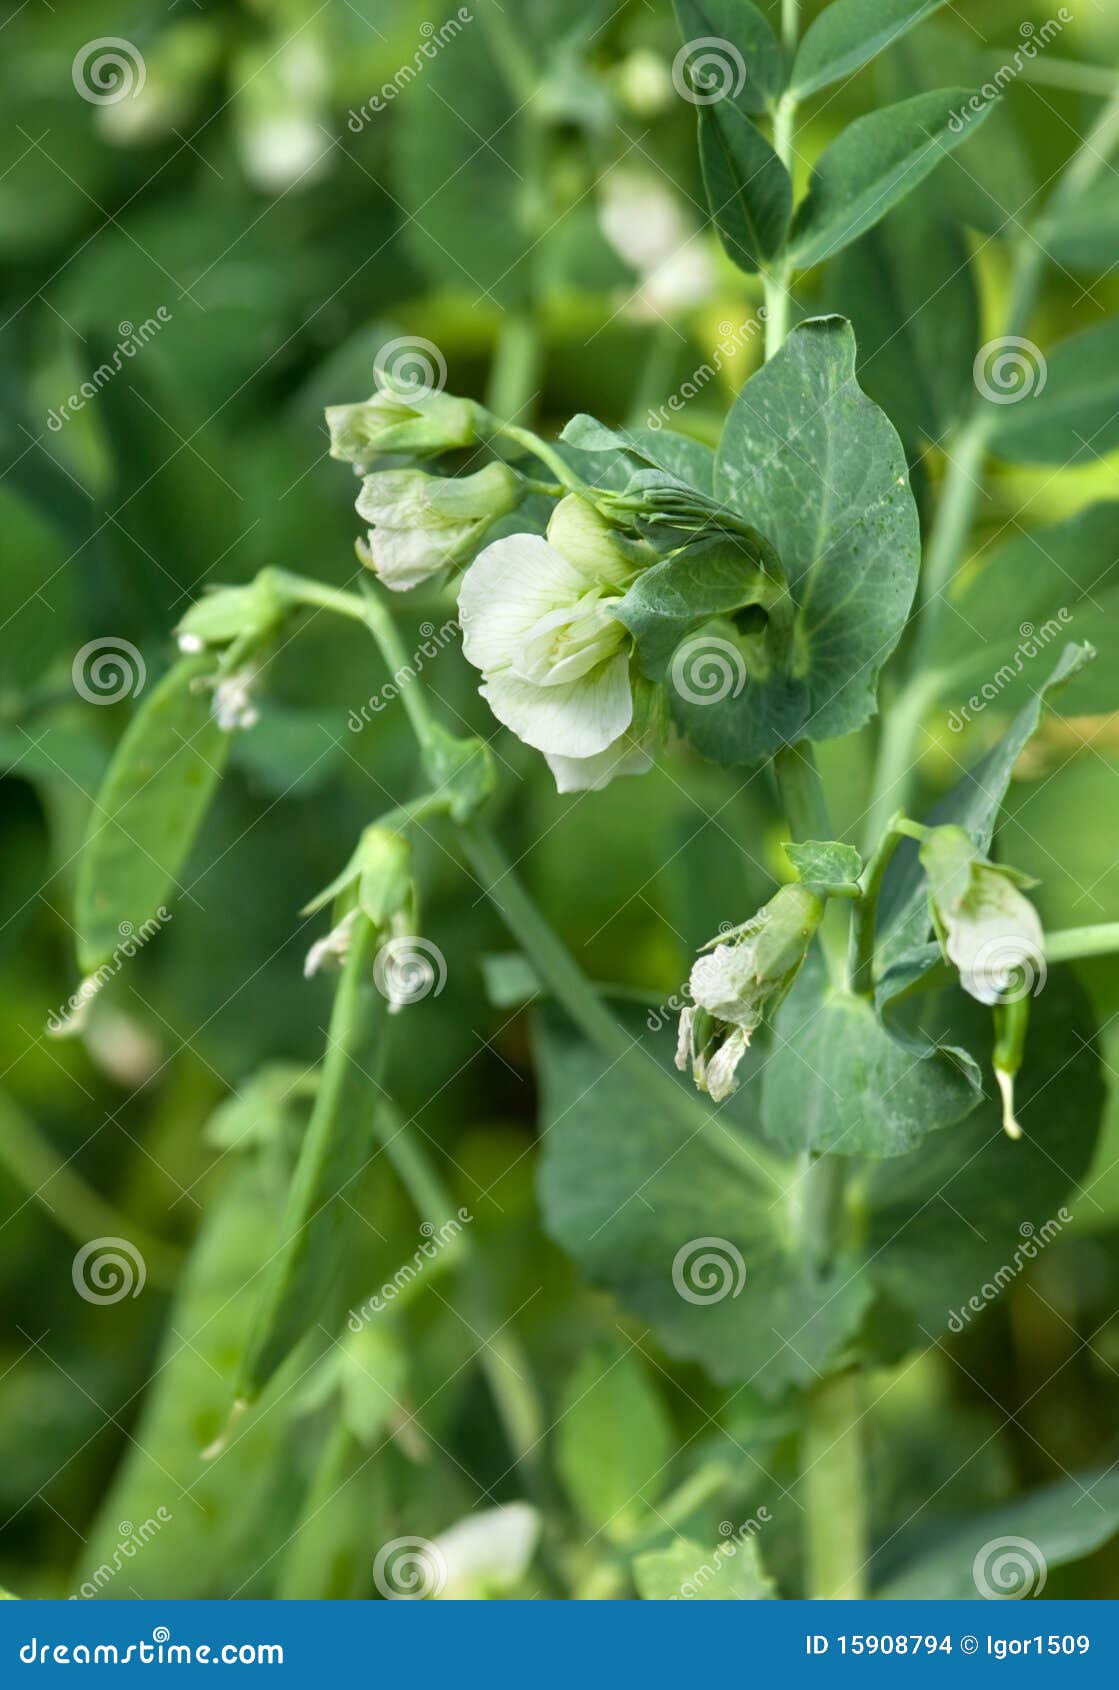 Blossom peas vegetable with flowers in garden